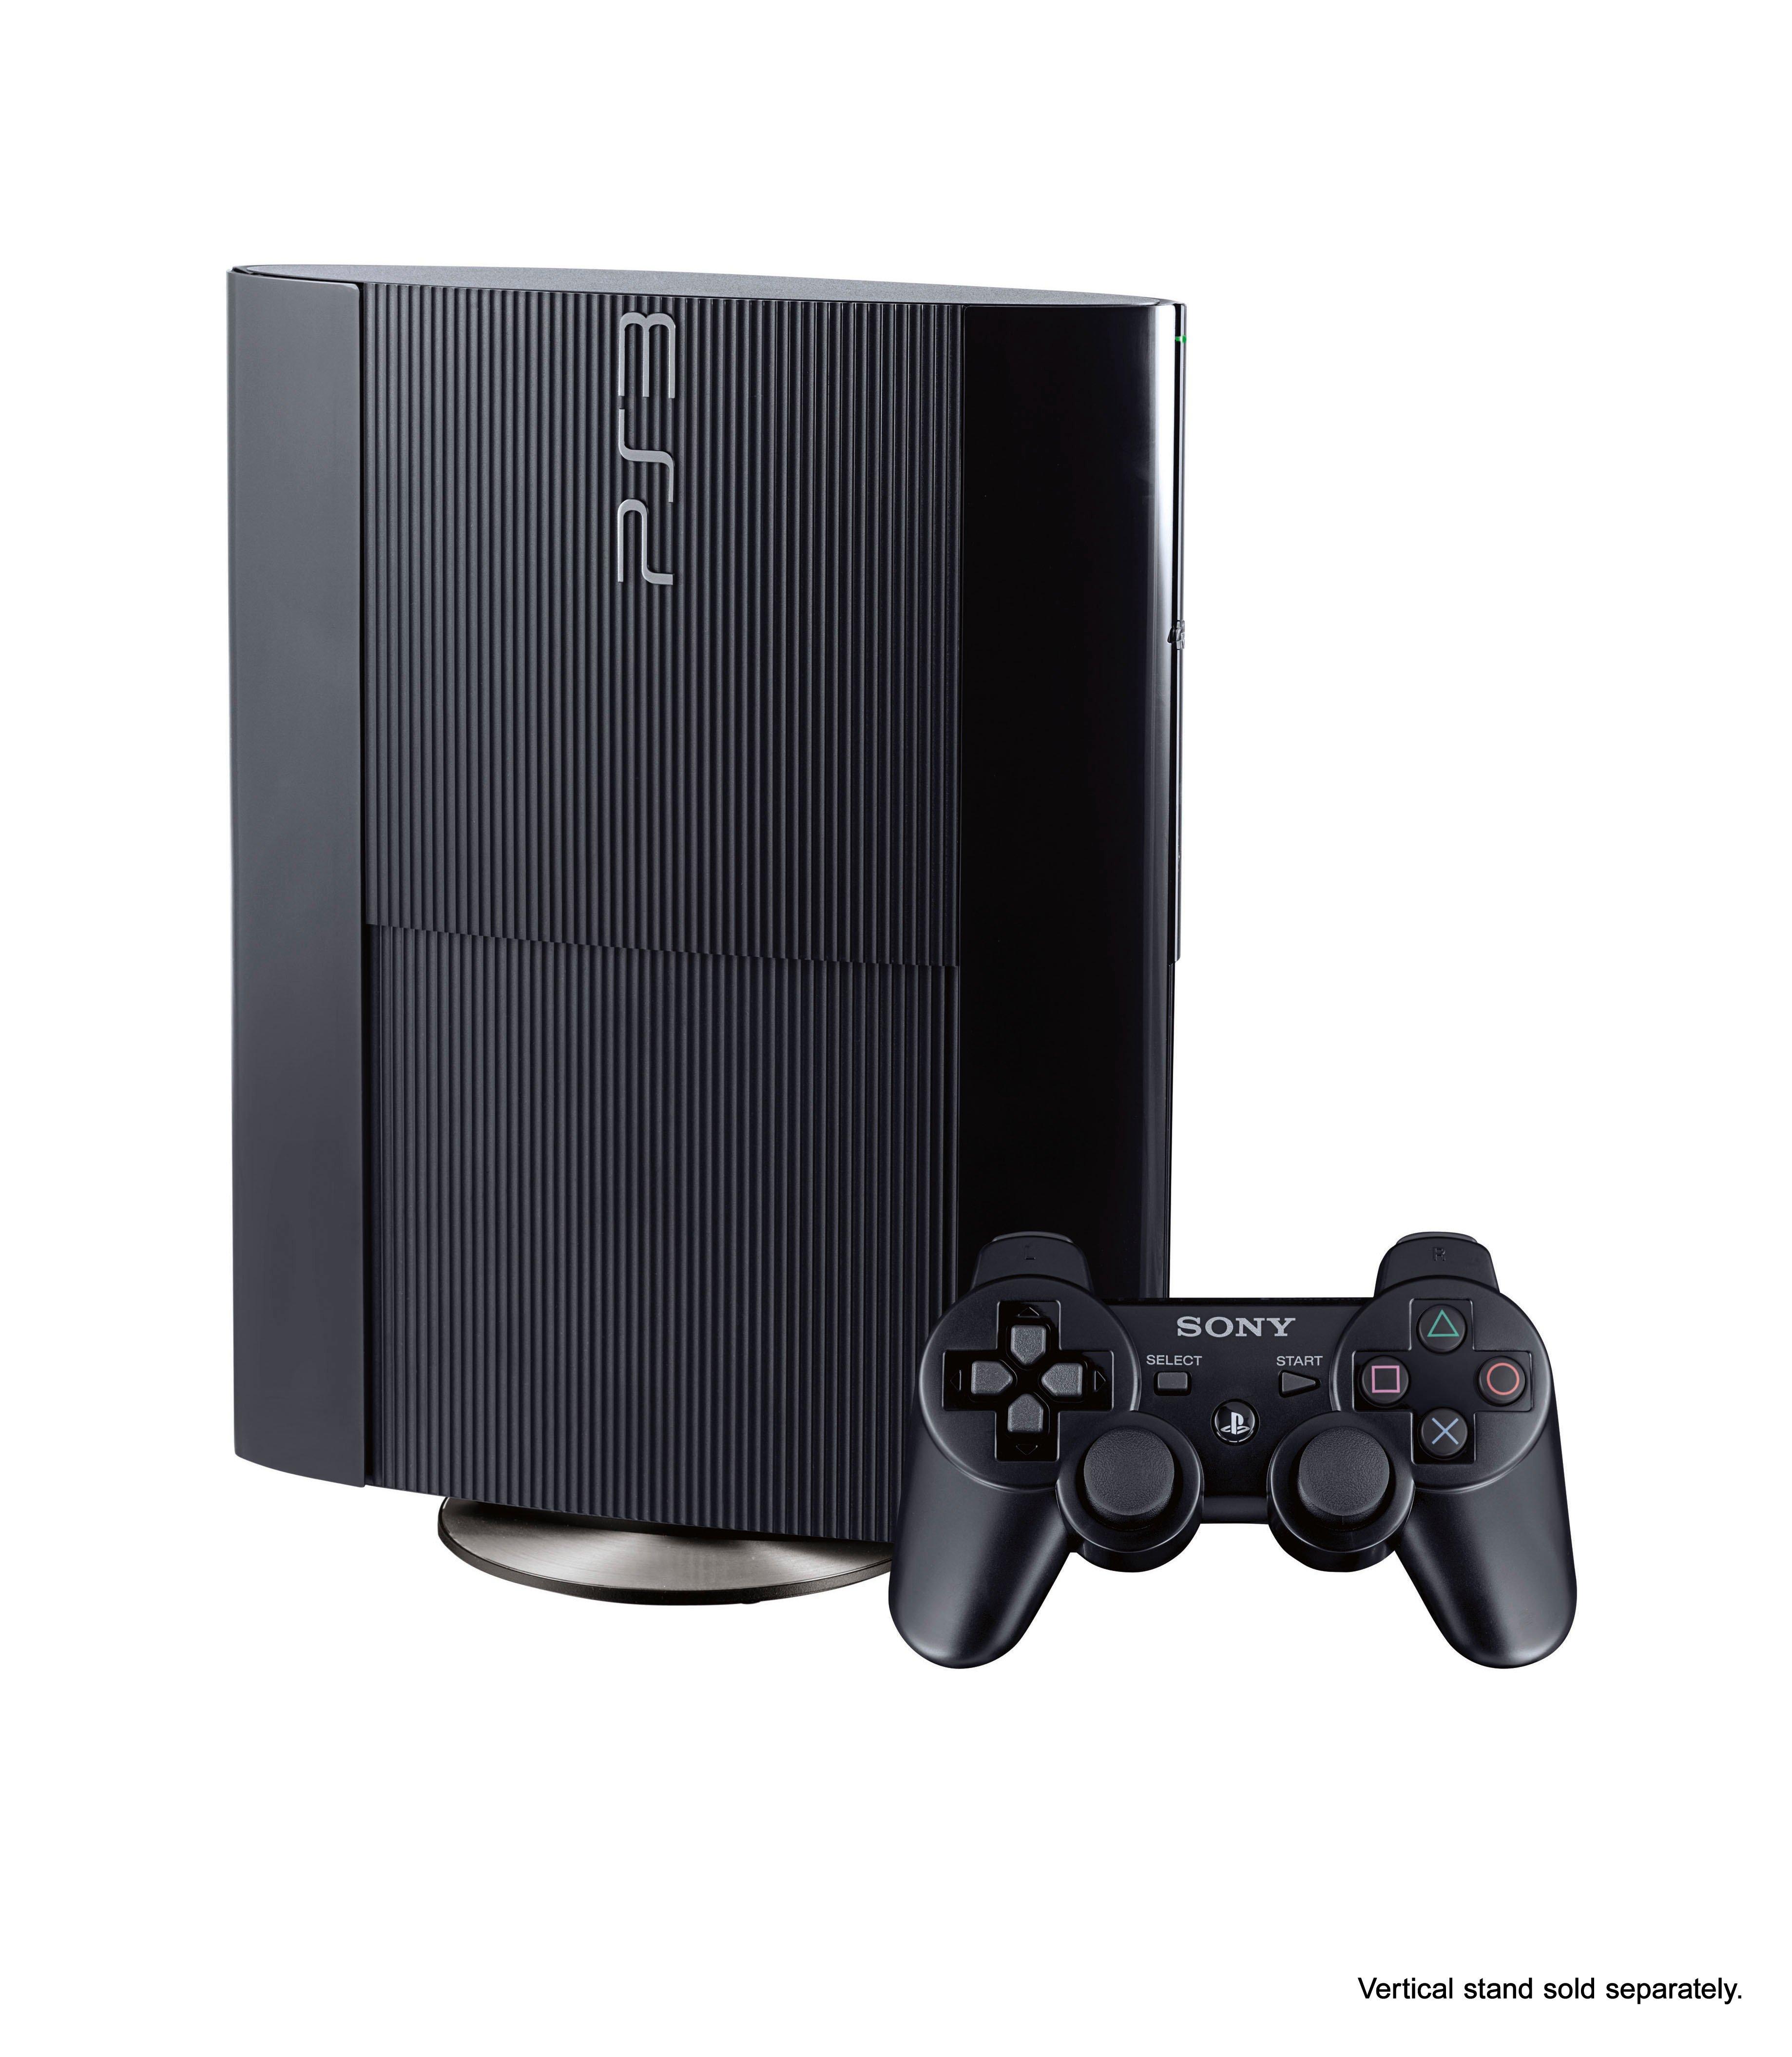 playstation 3 console for sale near me